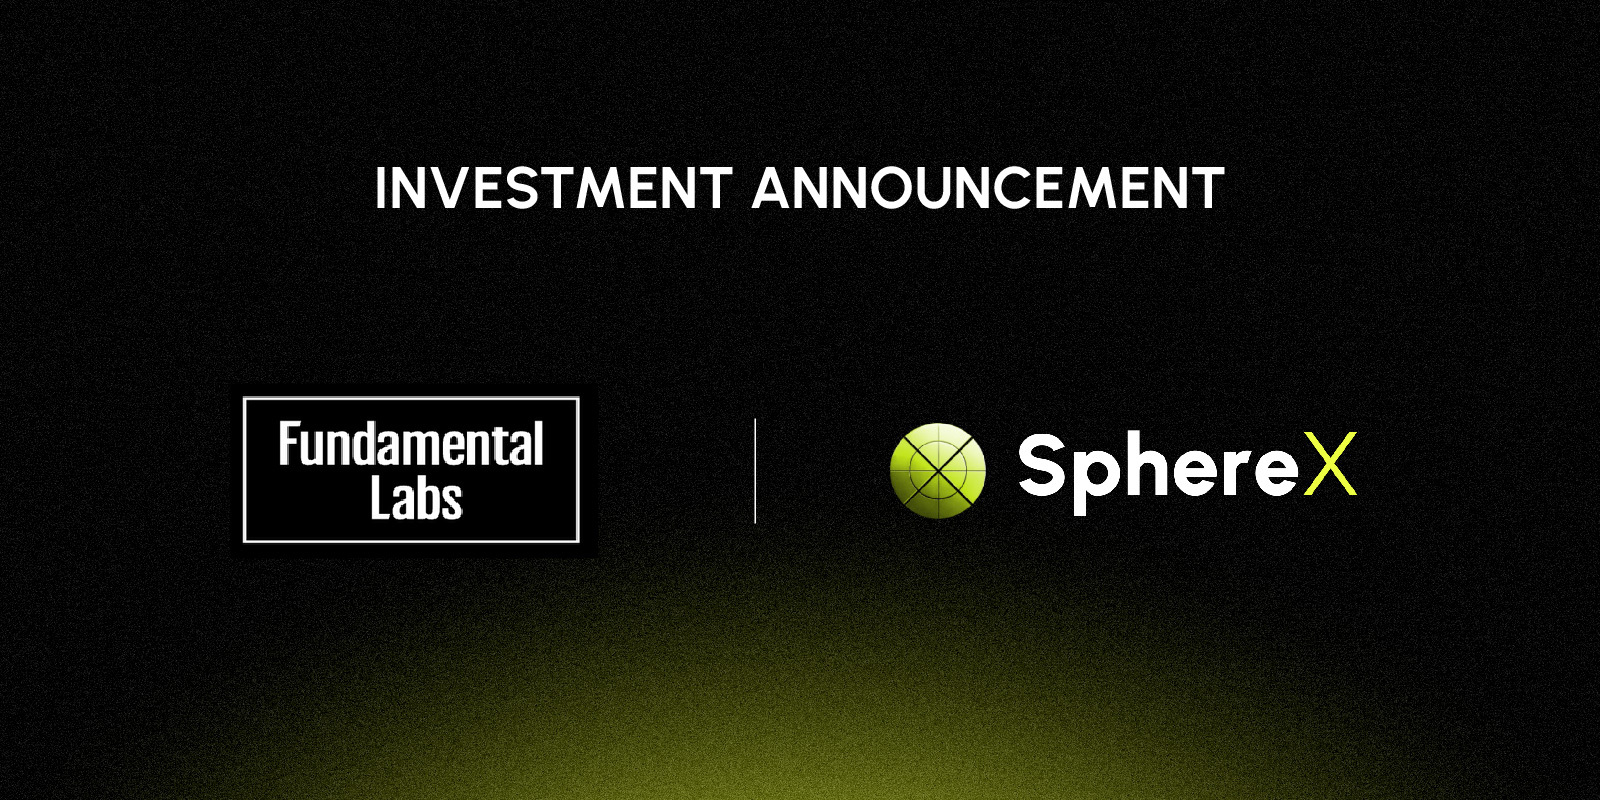 , SphereX Commences First Funding Round with Fundamental Labs as Anchor Investor